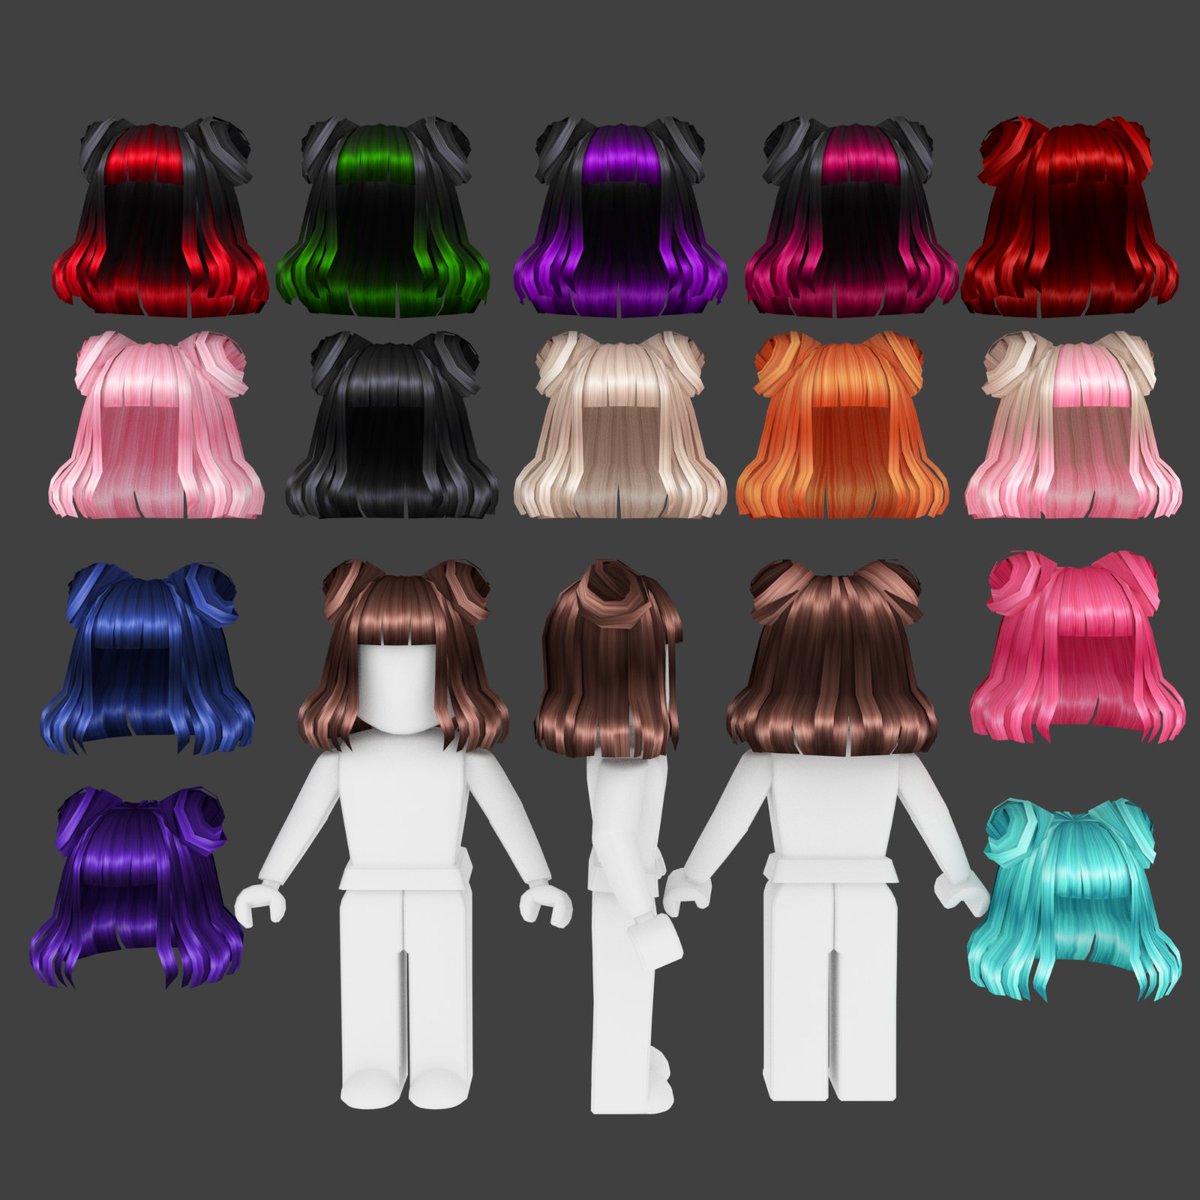 Potionorbs Blm On Twitter I Made A Space Bun Version Of My Aesthetic Short Hair I Hope You Like The Color Choices - space buns roblox